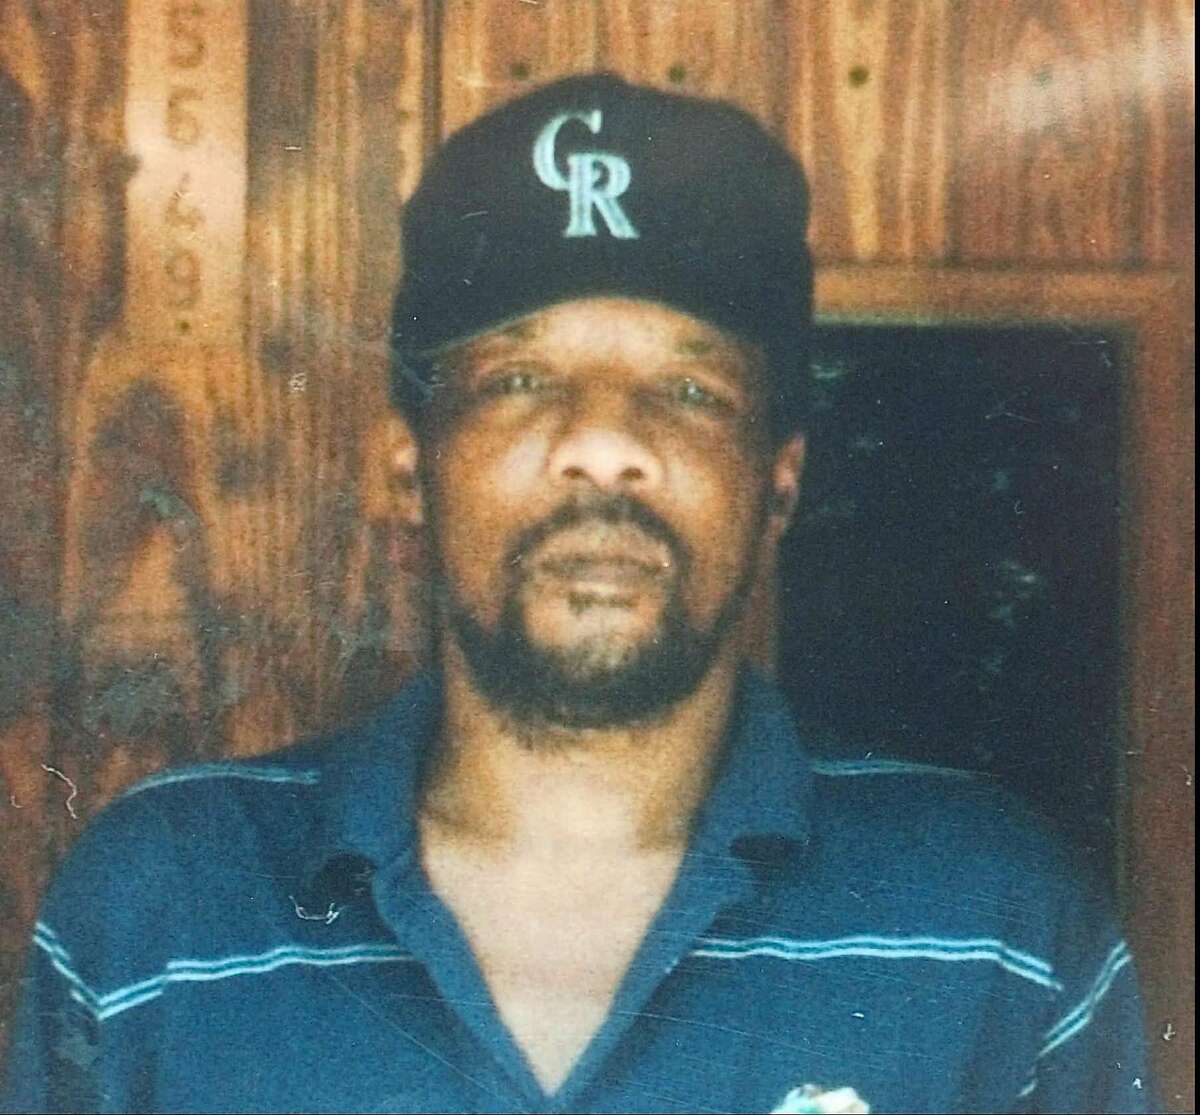 James Byrd Jr., shown in this 1997 family photo, was tied to a truck and dragged to his death along a rural East Texas road early Sunday, June 7, 1998, near Jasper, Texas.